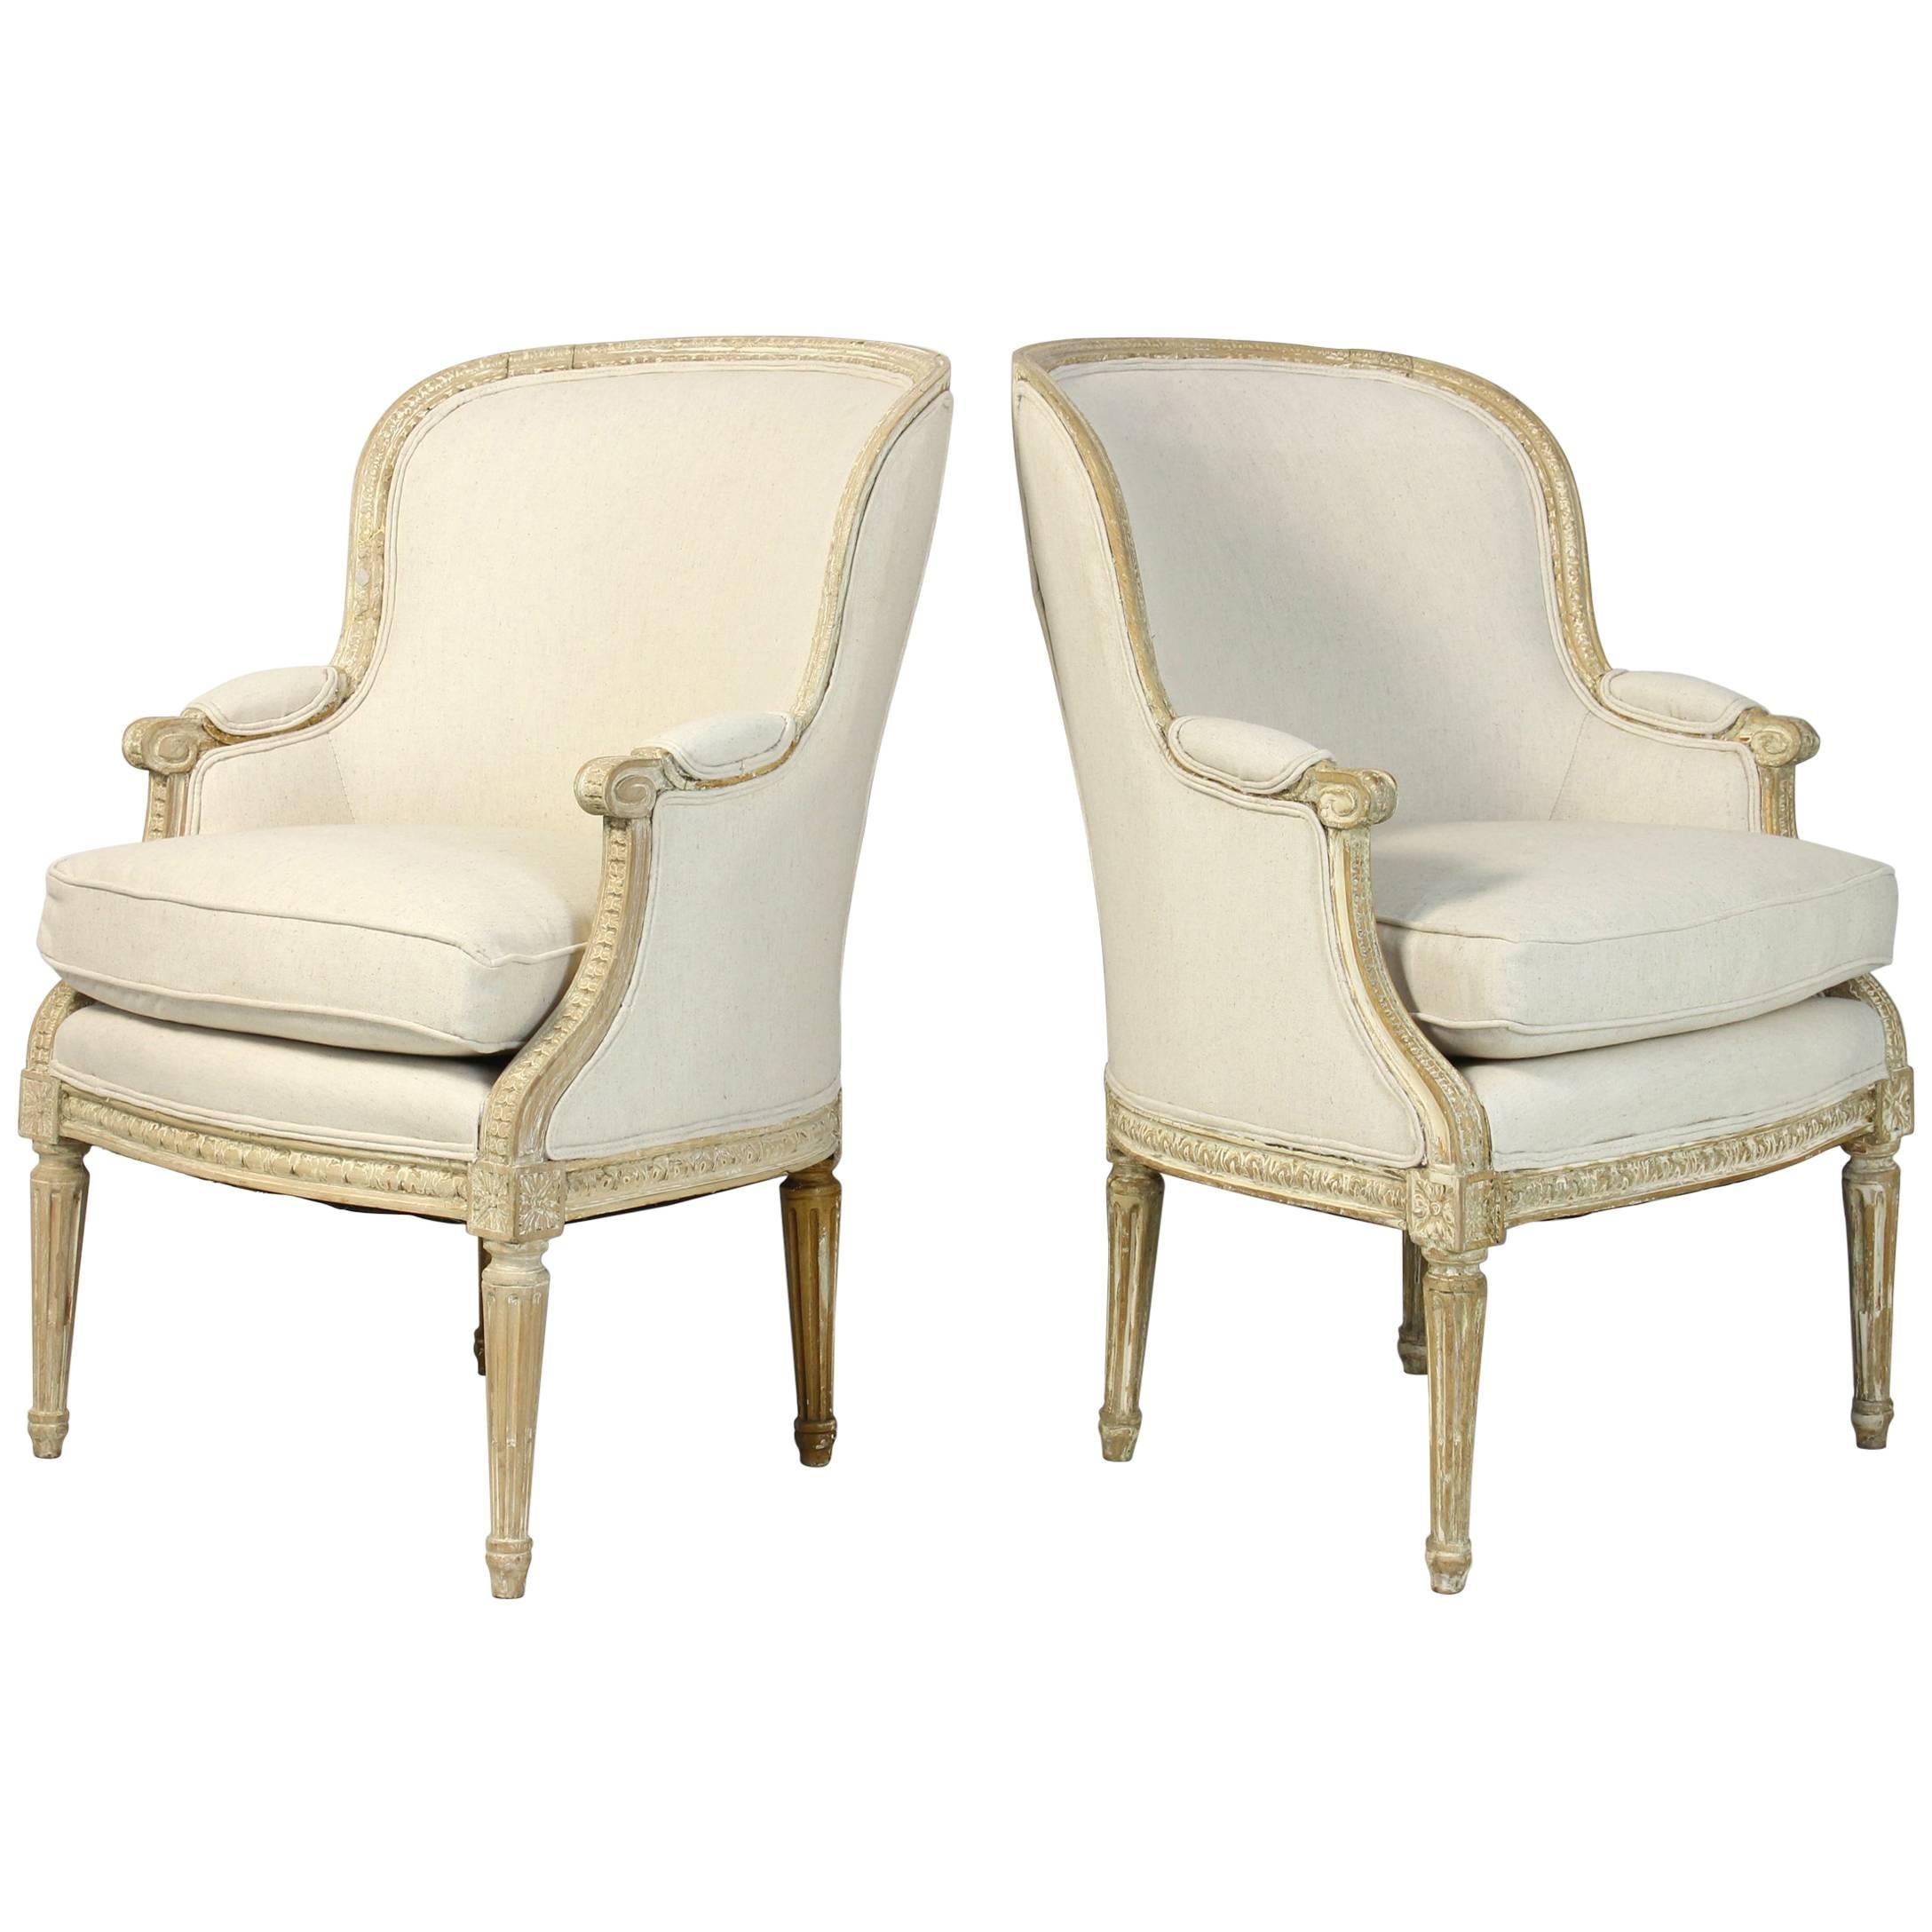 Pair of 19th Century French Bergeres or Armchairs For Sale